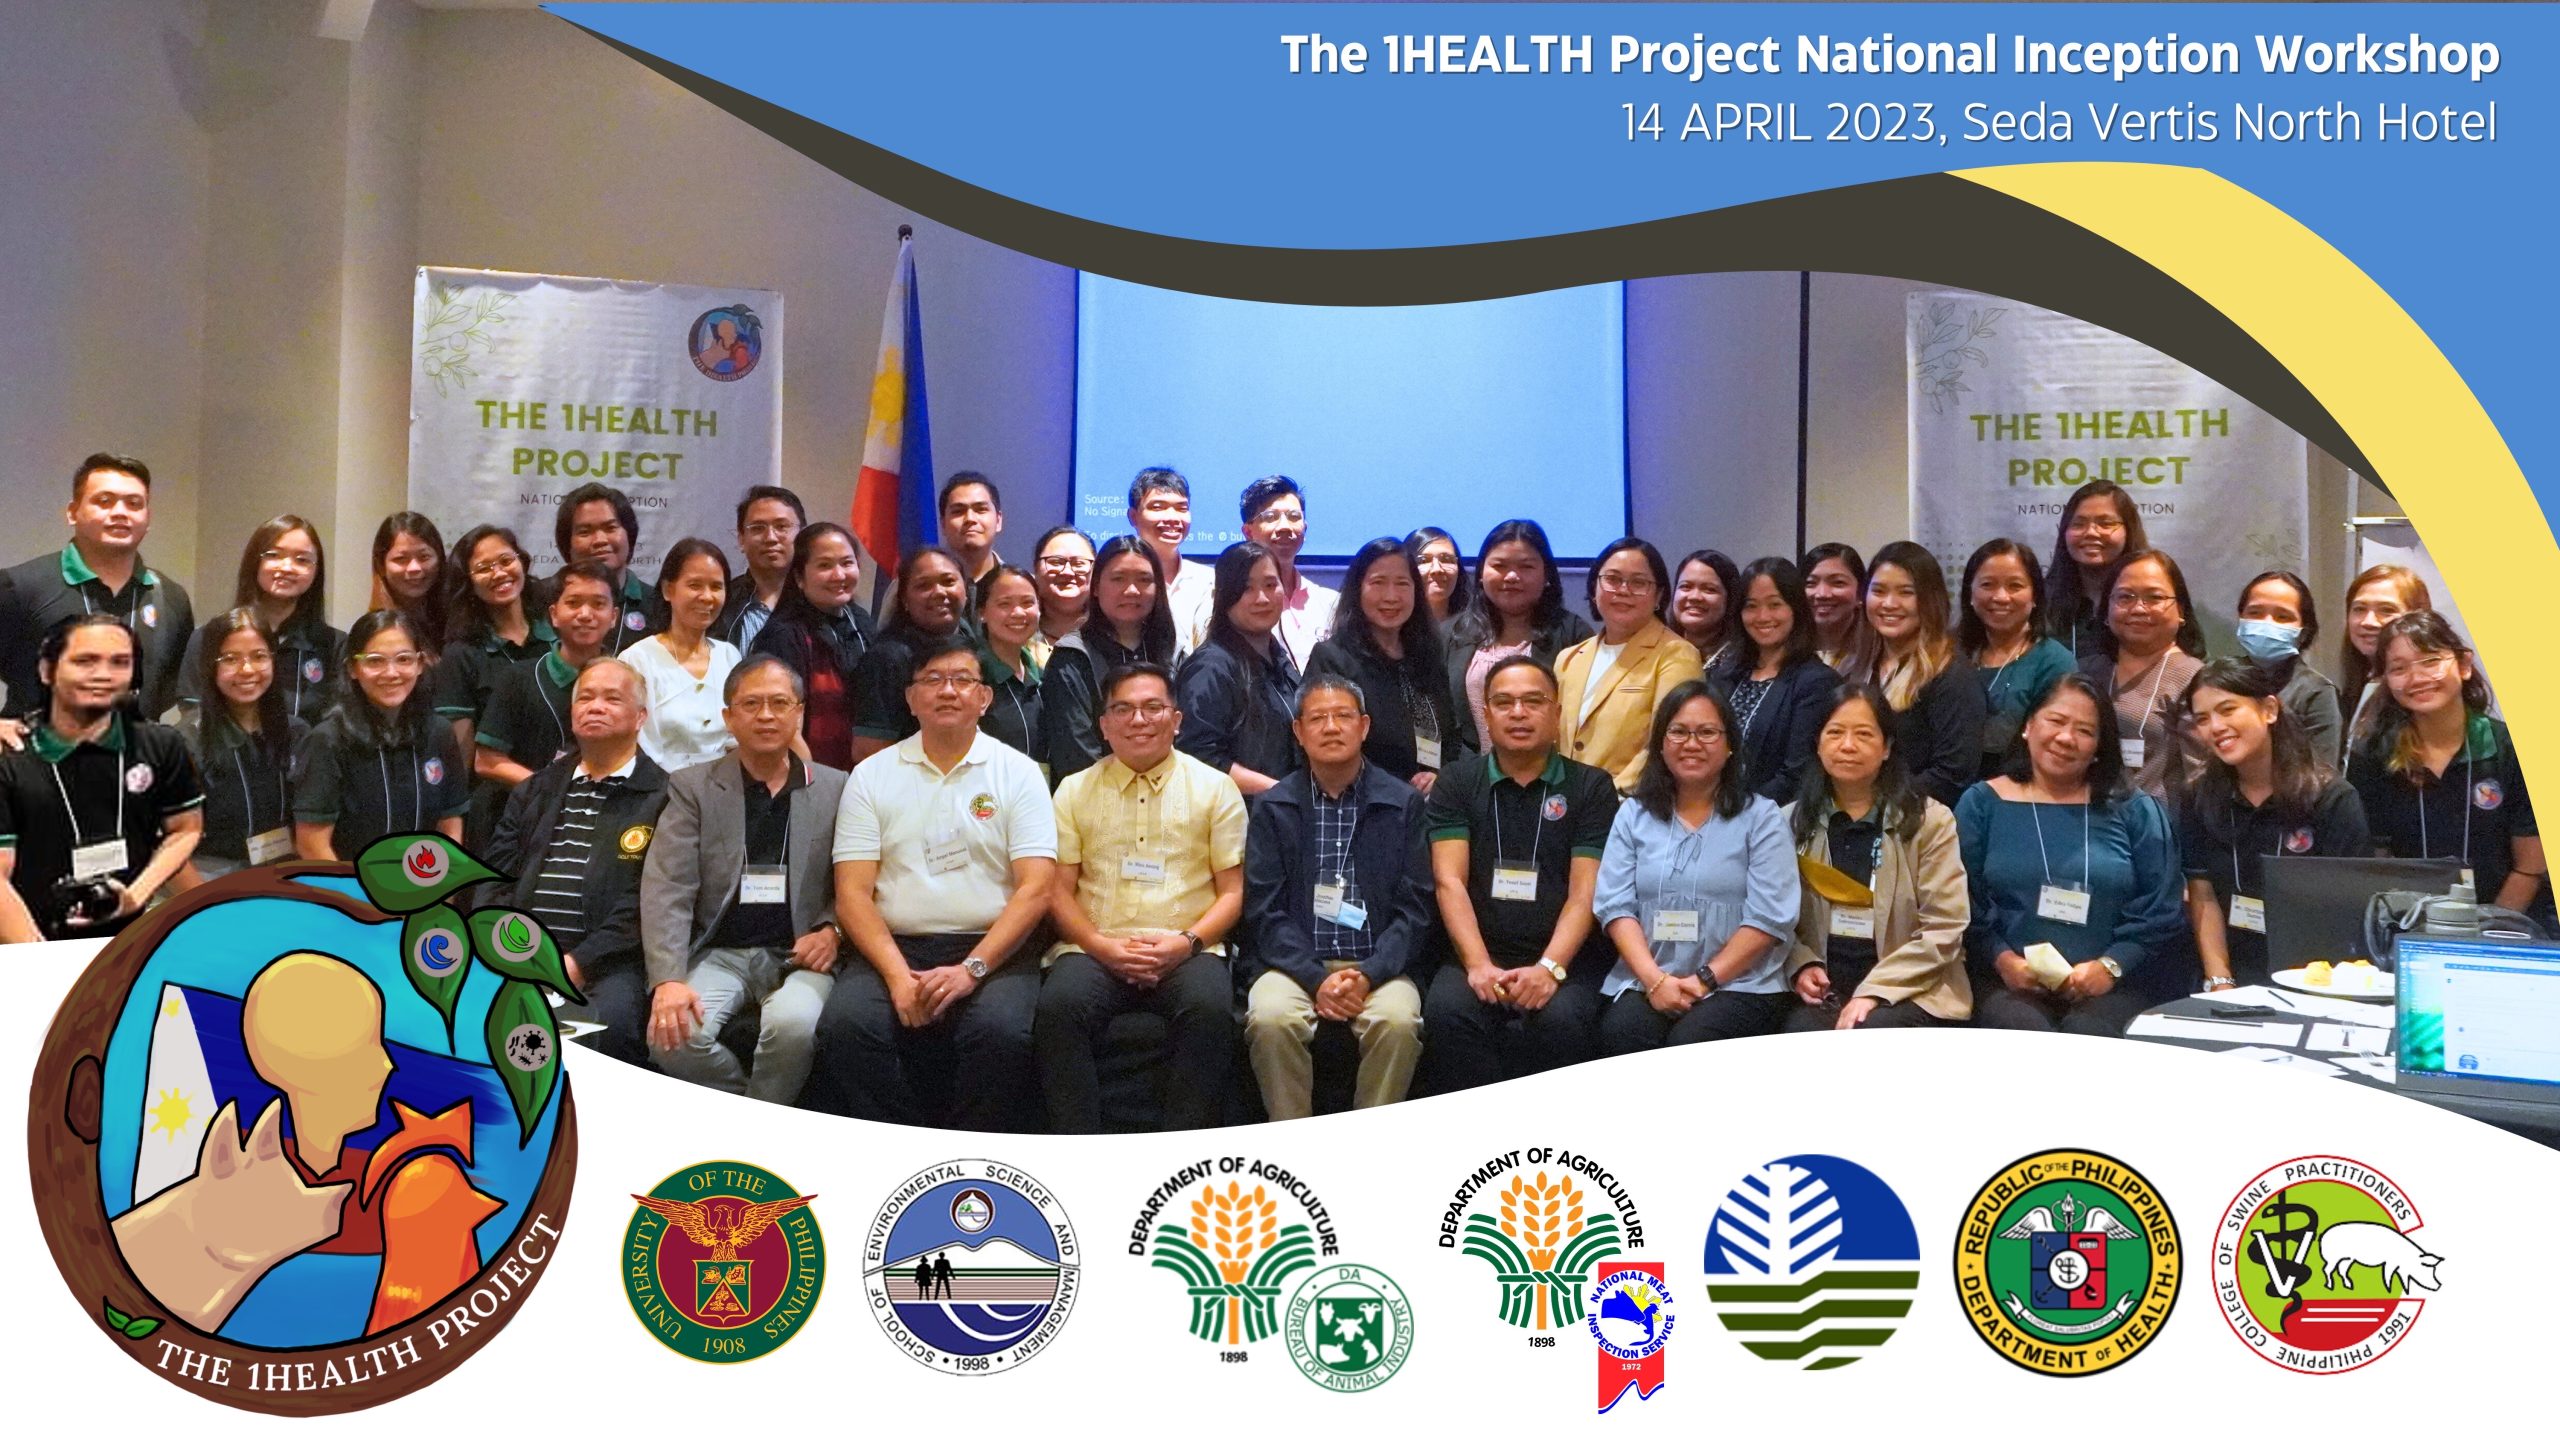 UPLB-SESAM holds the National Inception Workshop for The 1HEALTH Project on African Swine Fever, Avian Influenza, and Antimicrobial Resistance Surveillance